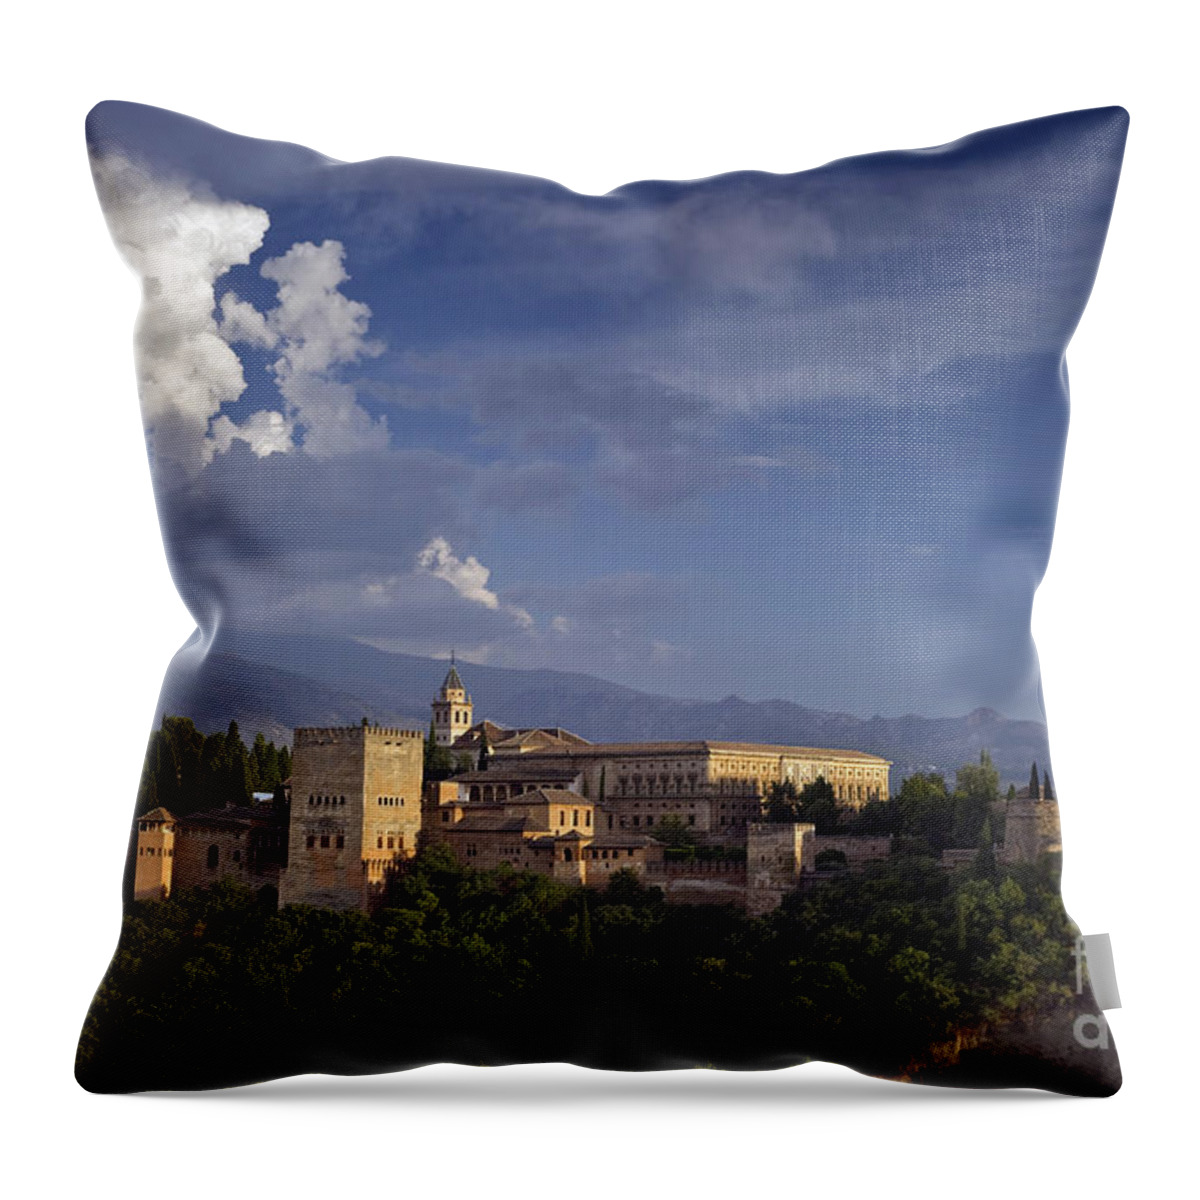 Spain Throw Pillow featuring the photograph View Of The Alhambra, Granada, Spain by 